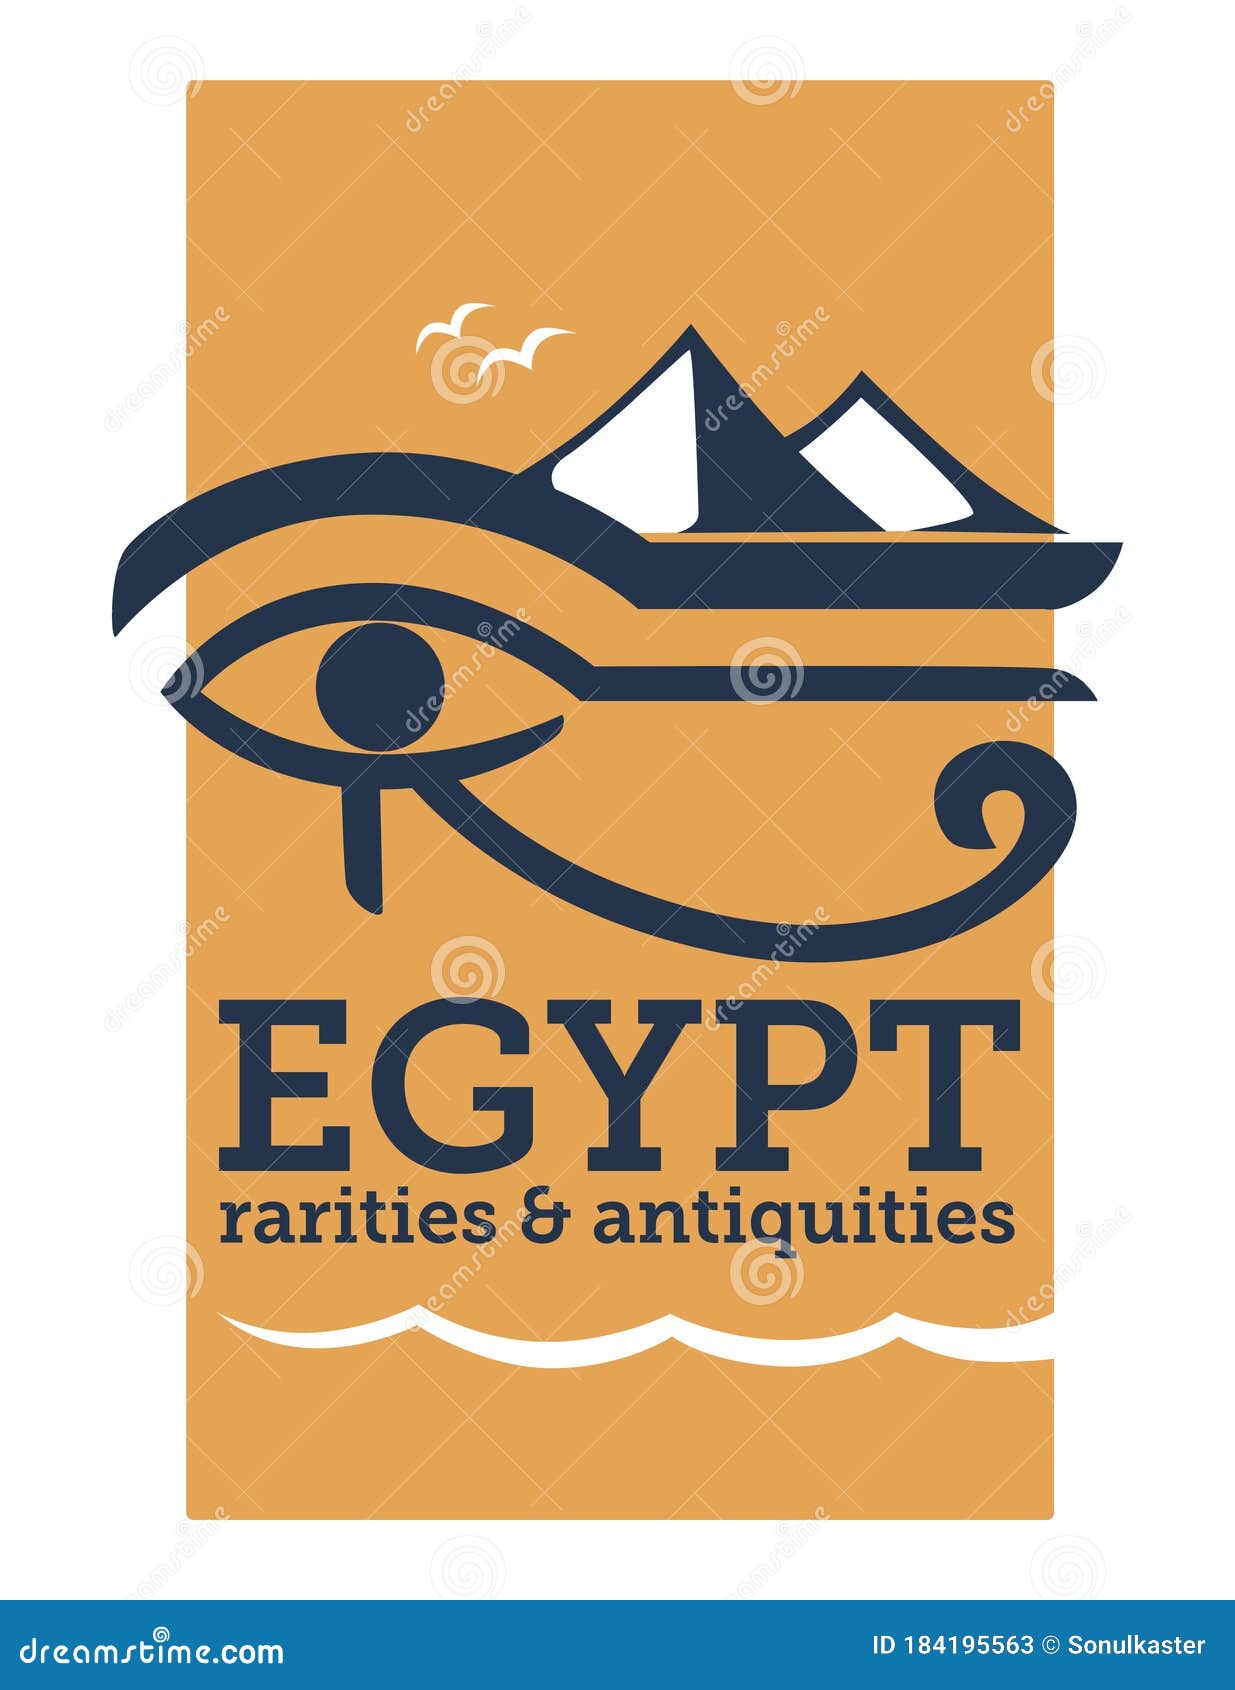 egypt rarities and antiquities, discovering ancient culture and heritage